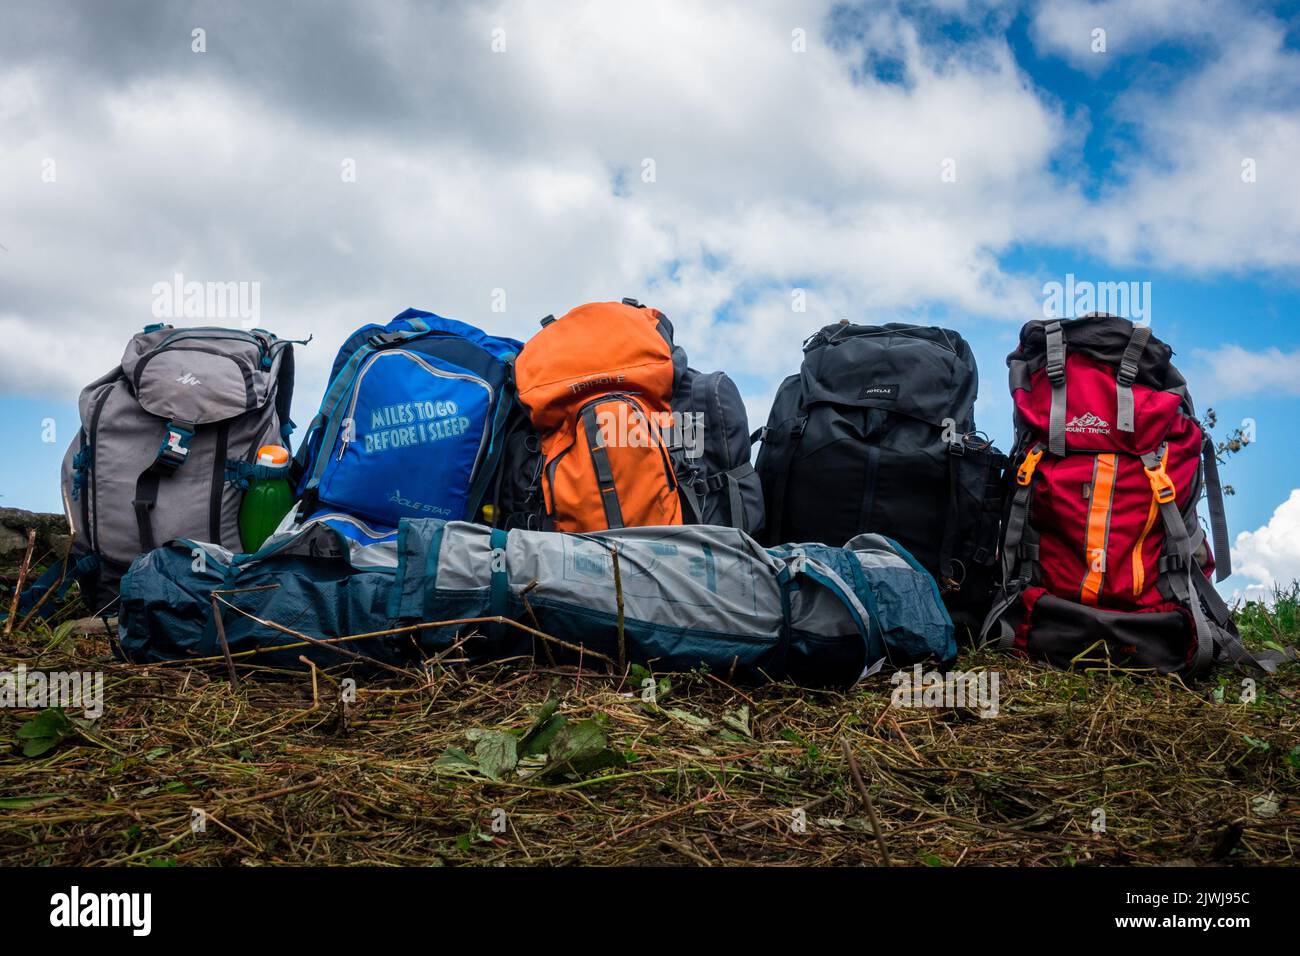 September 16th 2021. Uttarakhand India. Colorful backpacks of hikers in line in the meadows of Himalayas with landscapes in the background. Stock Photo